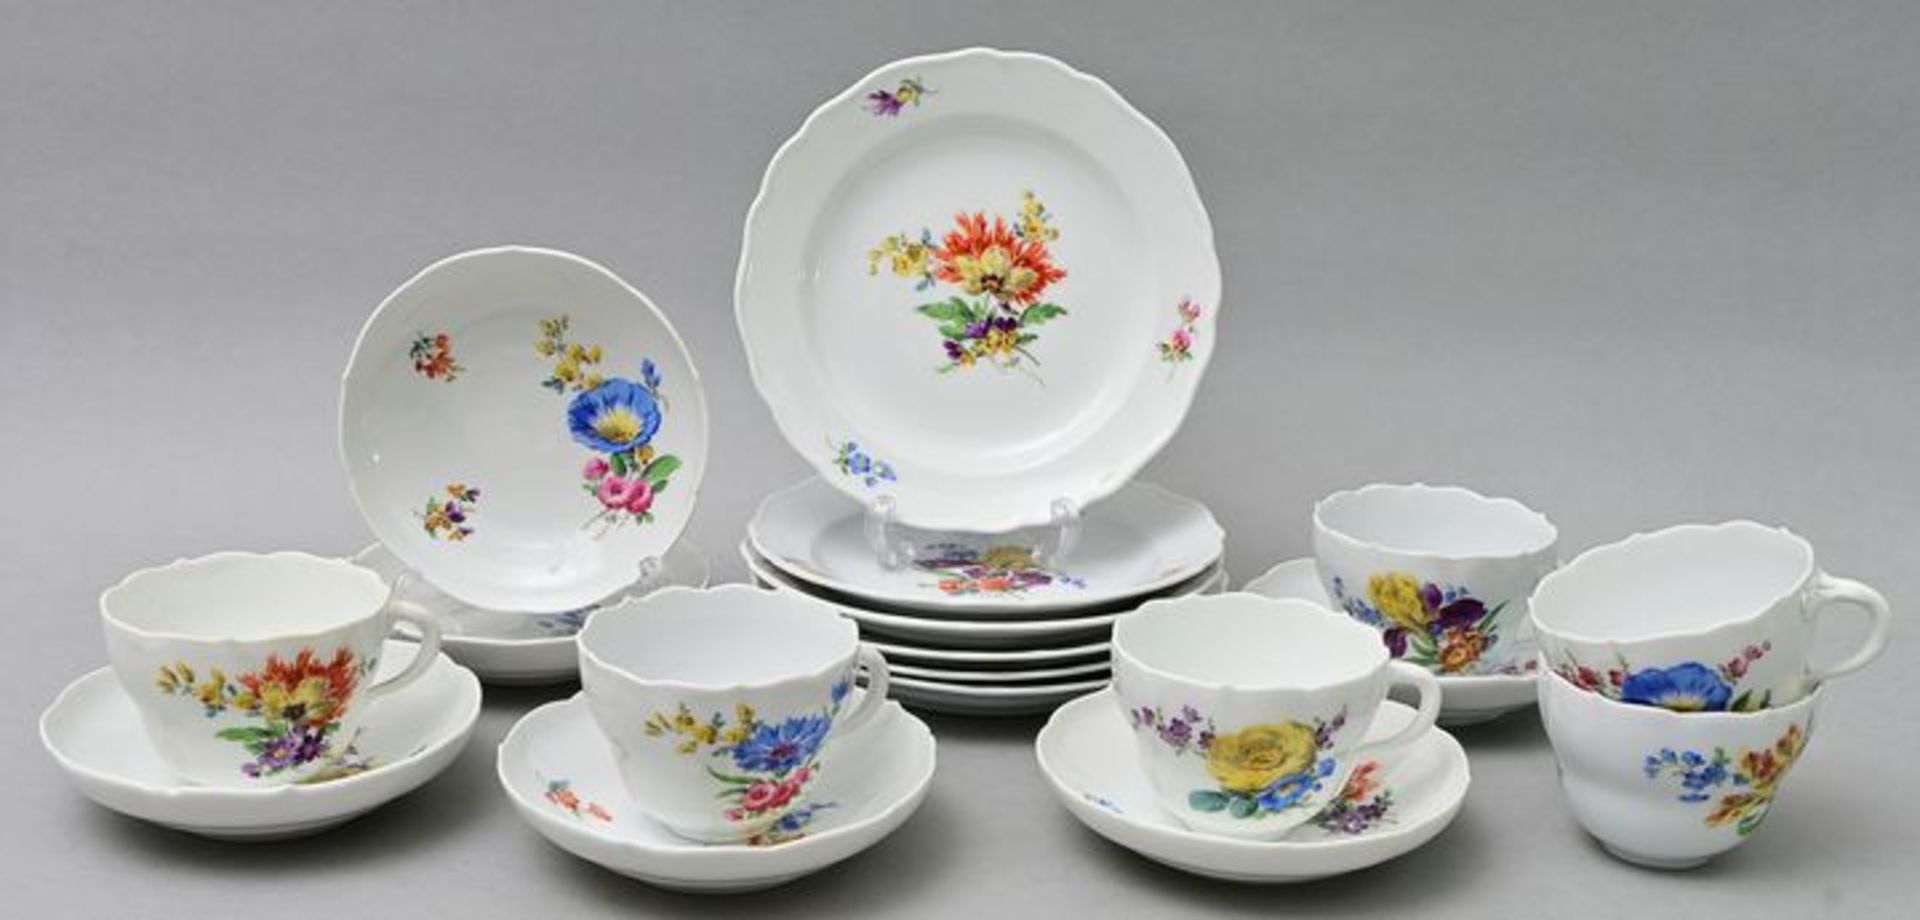 Gedecke/ cups with saucers and plates